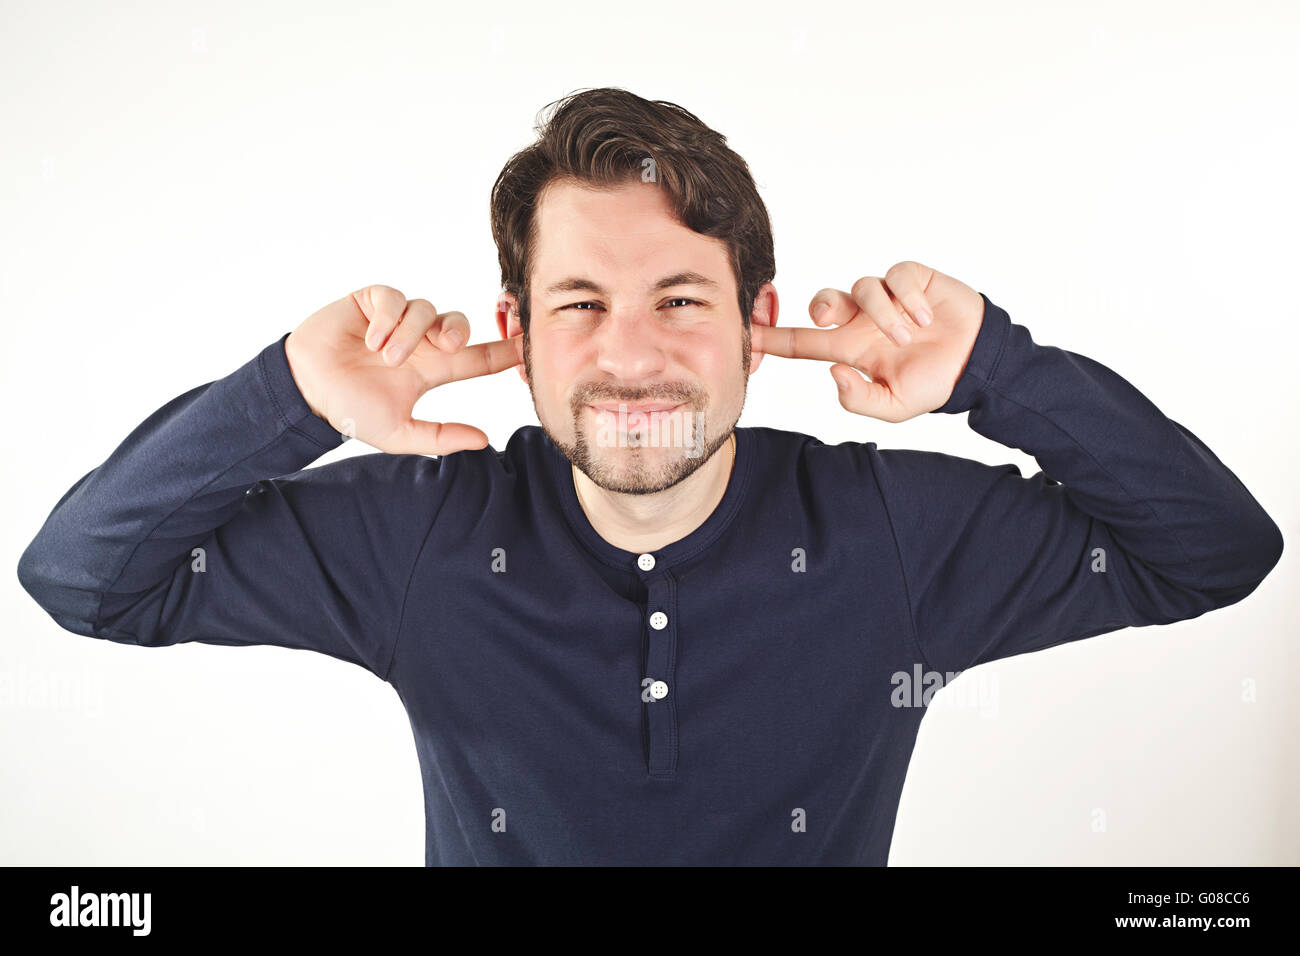 young man covering ears from loud noise, isolated on white background Stock Photo